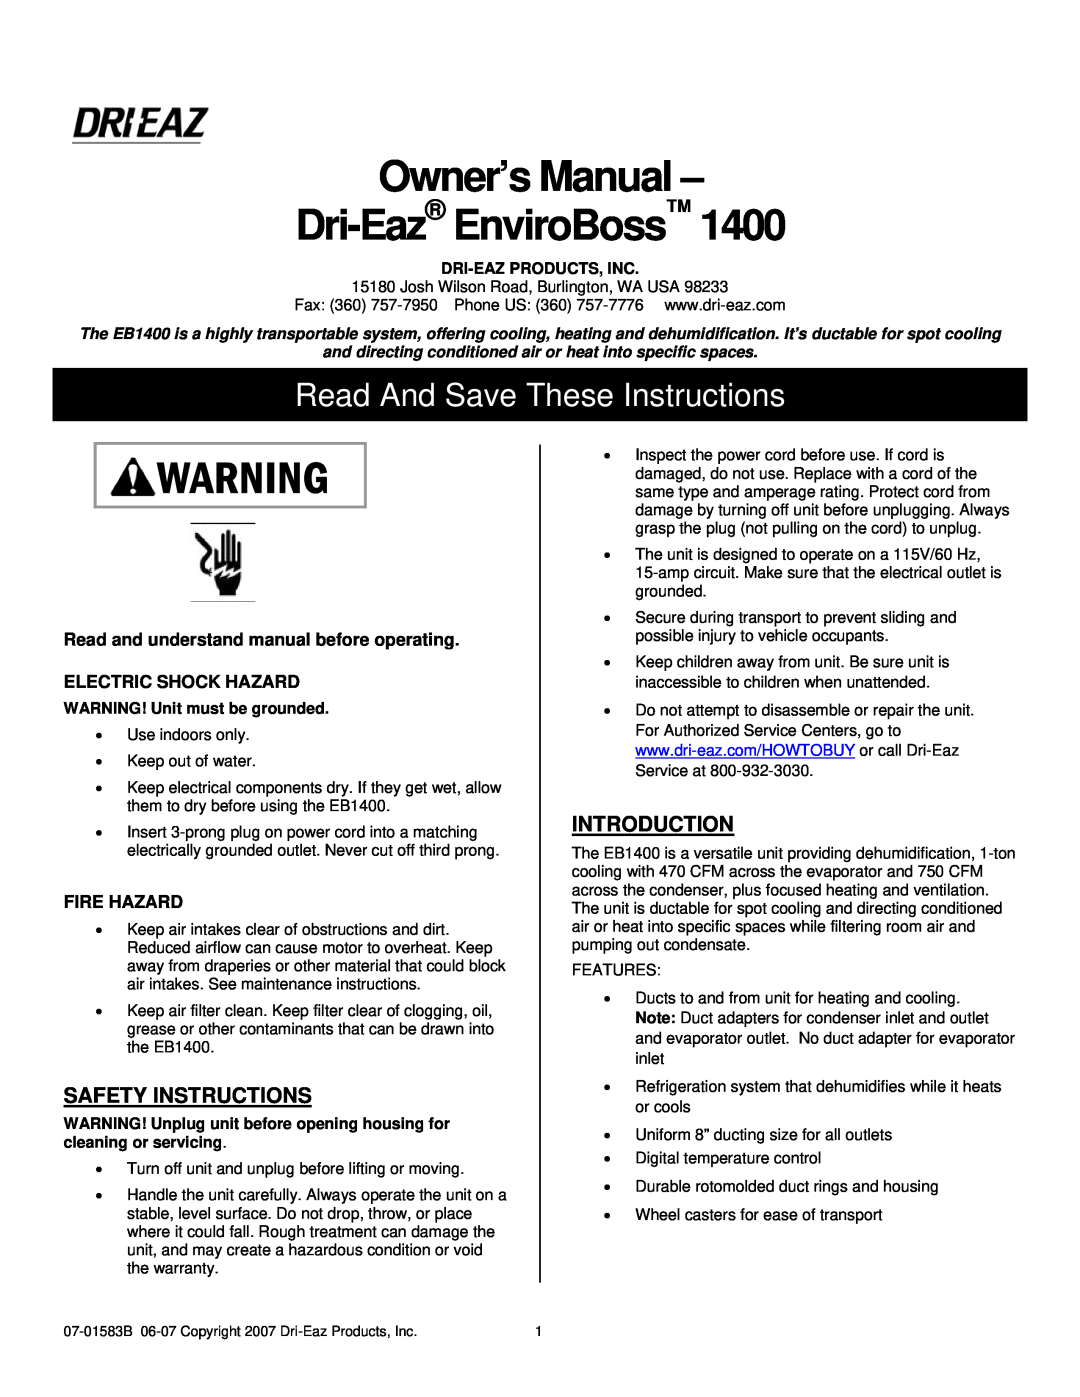 Dri-Eaz 1400 owner manual Read And Save These Instructions, Safety Instructions, Introduction, Electric Shock Hazard 